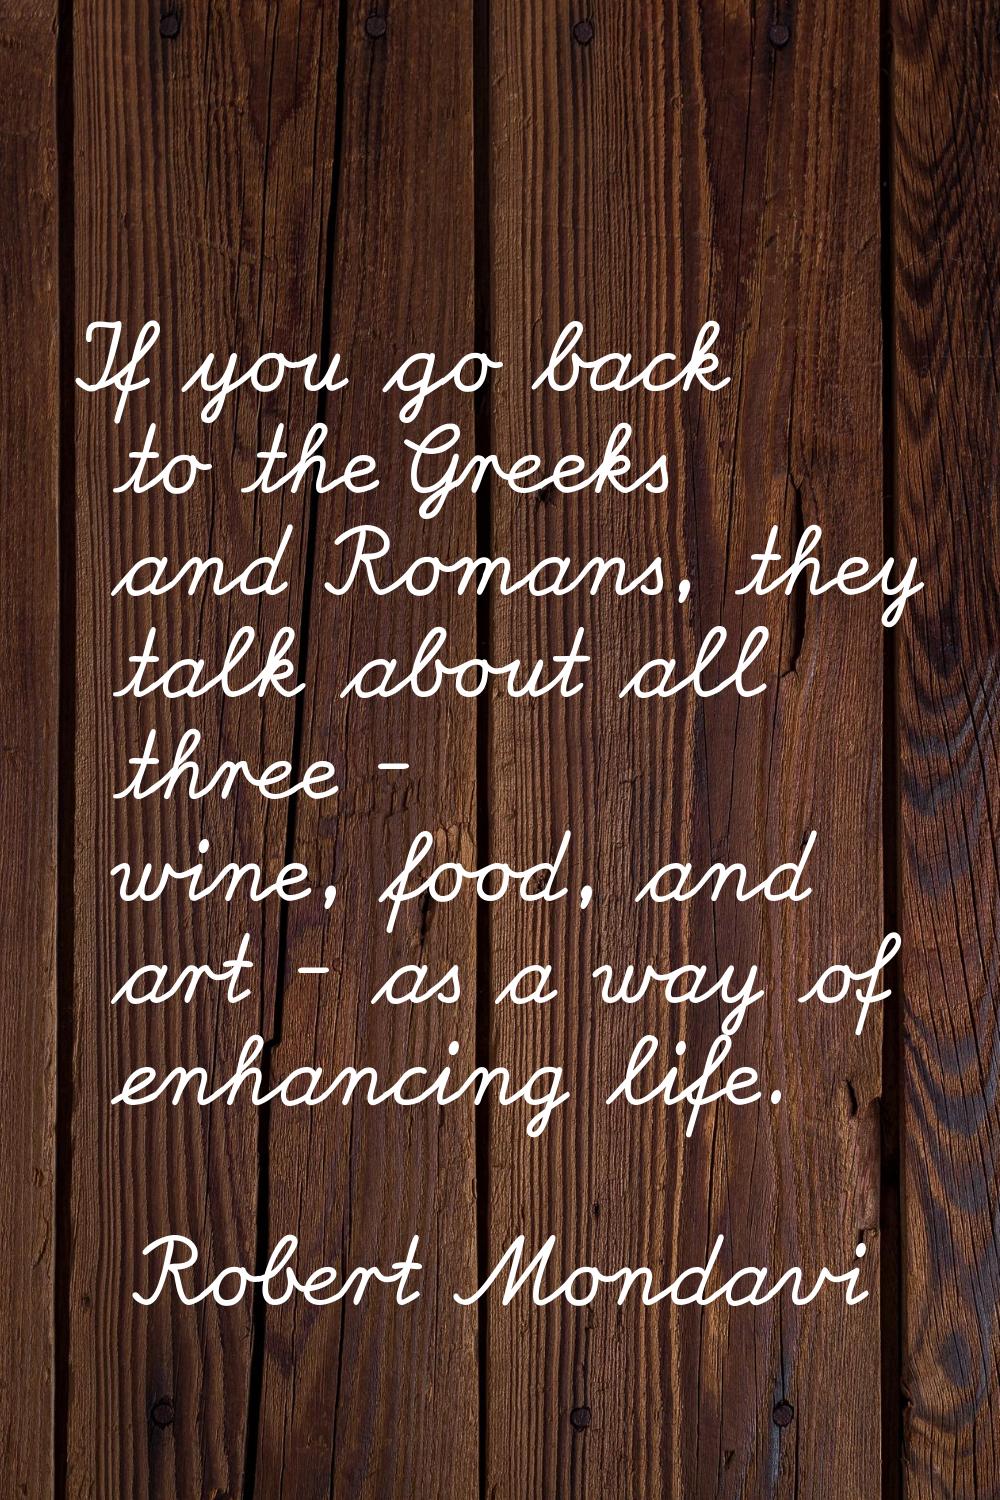 If you go back to the Greeks and Romans, they talk about all three - wine, food, and art - as a way